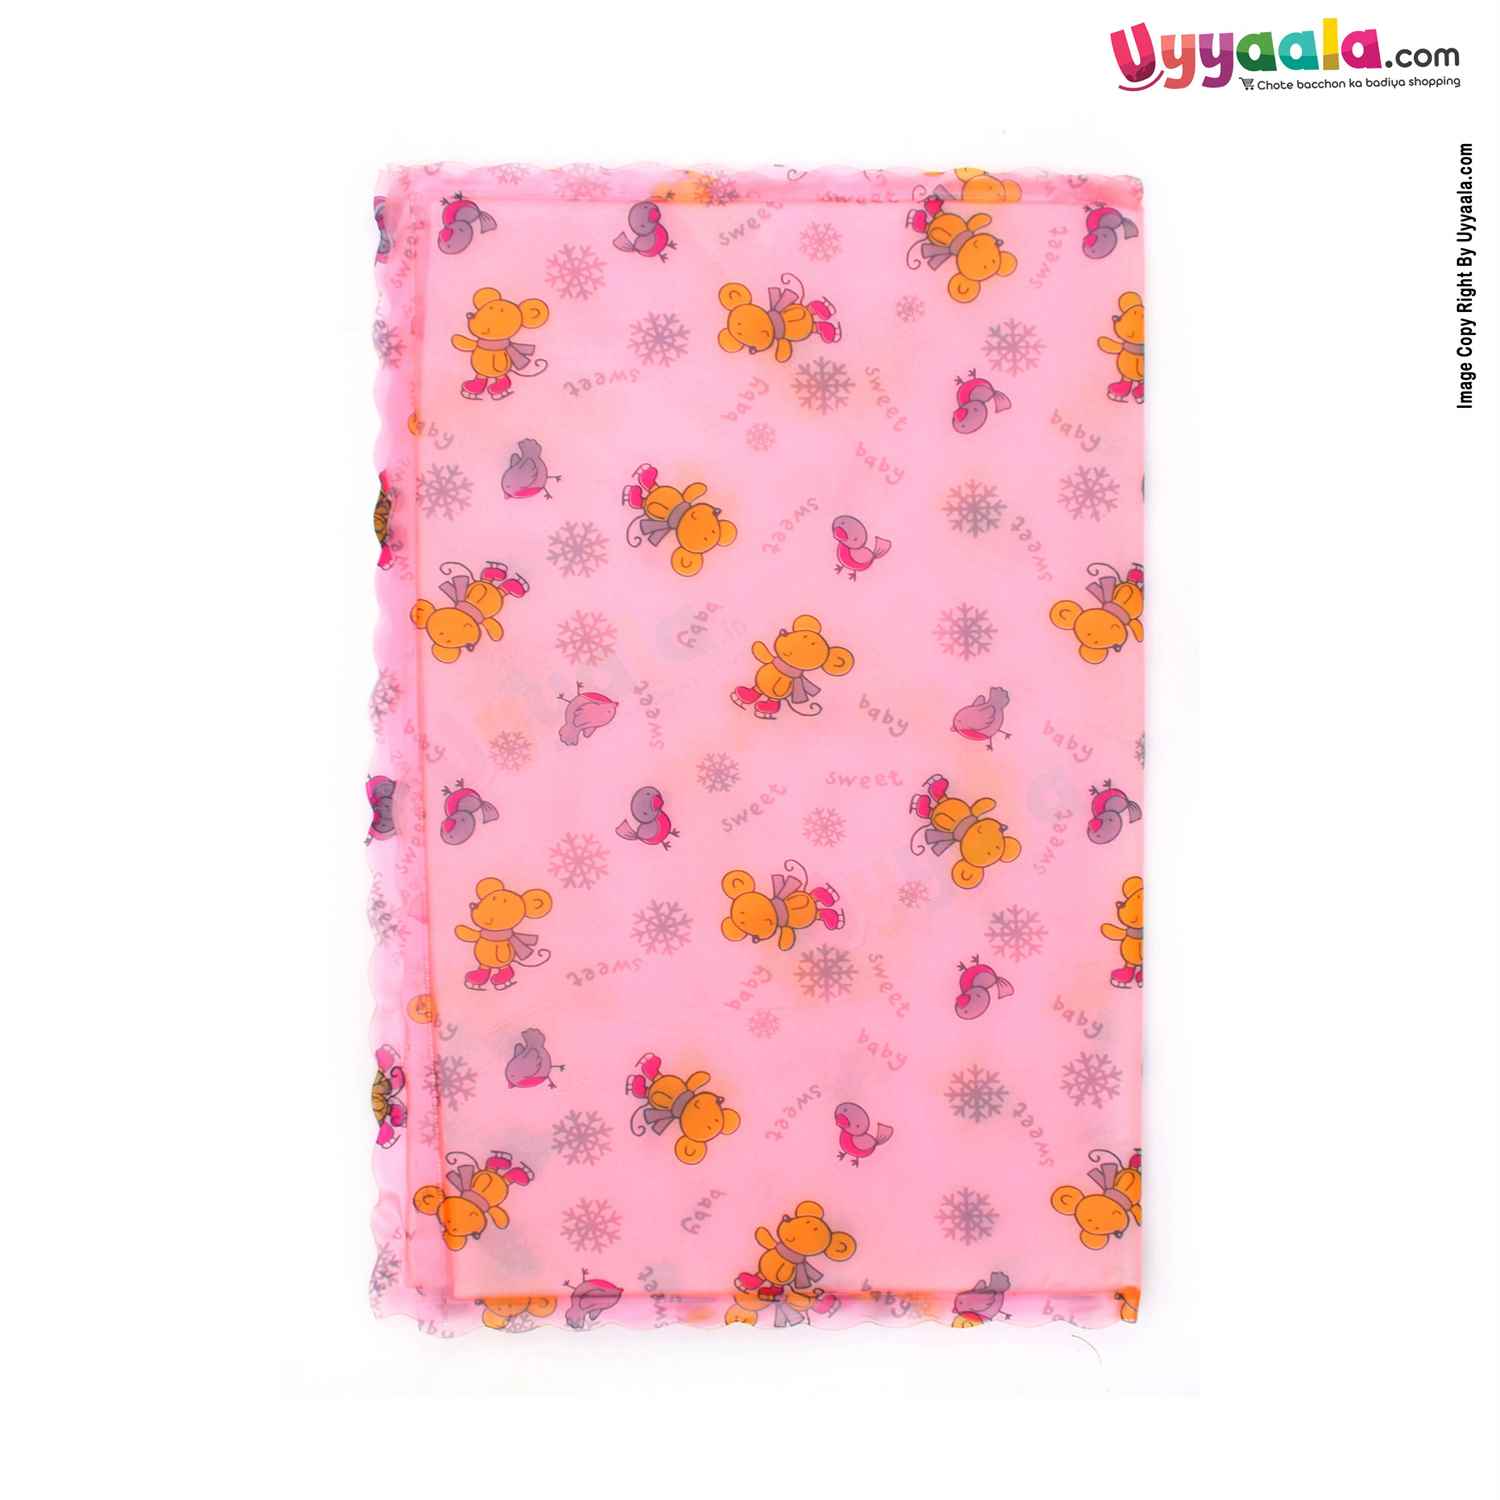 Plastic Sleeping Mat For Babies, Waterproof Bed Protector With Animal Print - Small